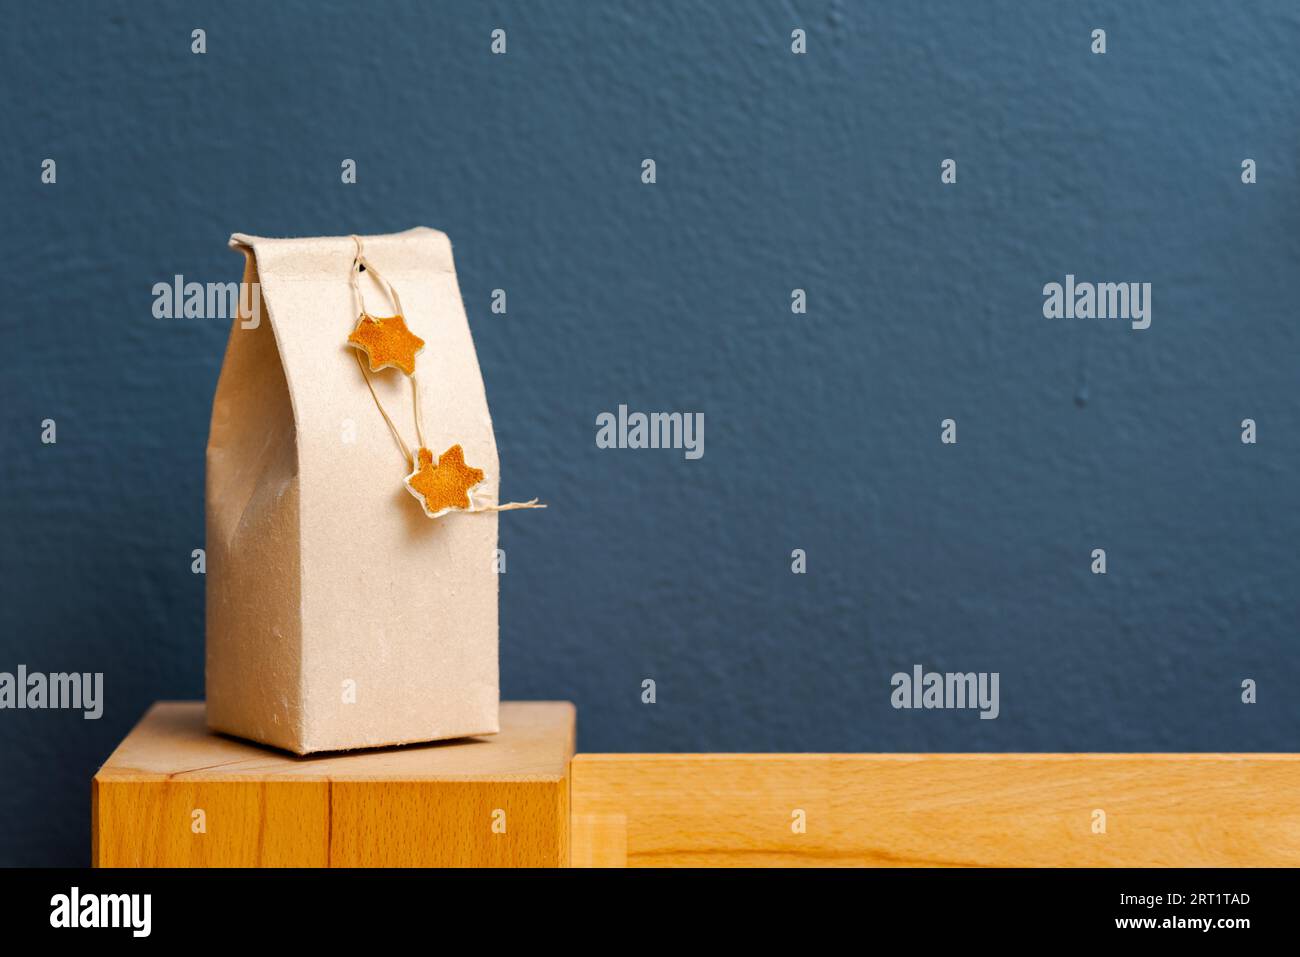 Selfmade gift box out of old beverage carton decorated with star shaped cut out dried roange peel standing on bedhead of wooden bed with copy space Stock Photo